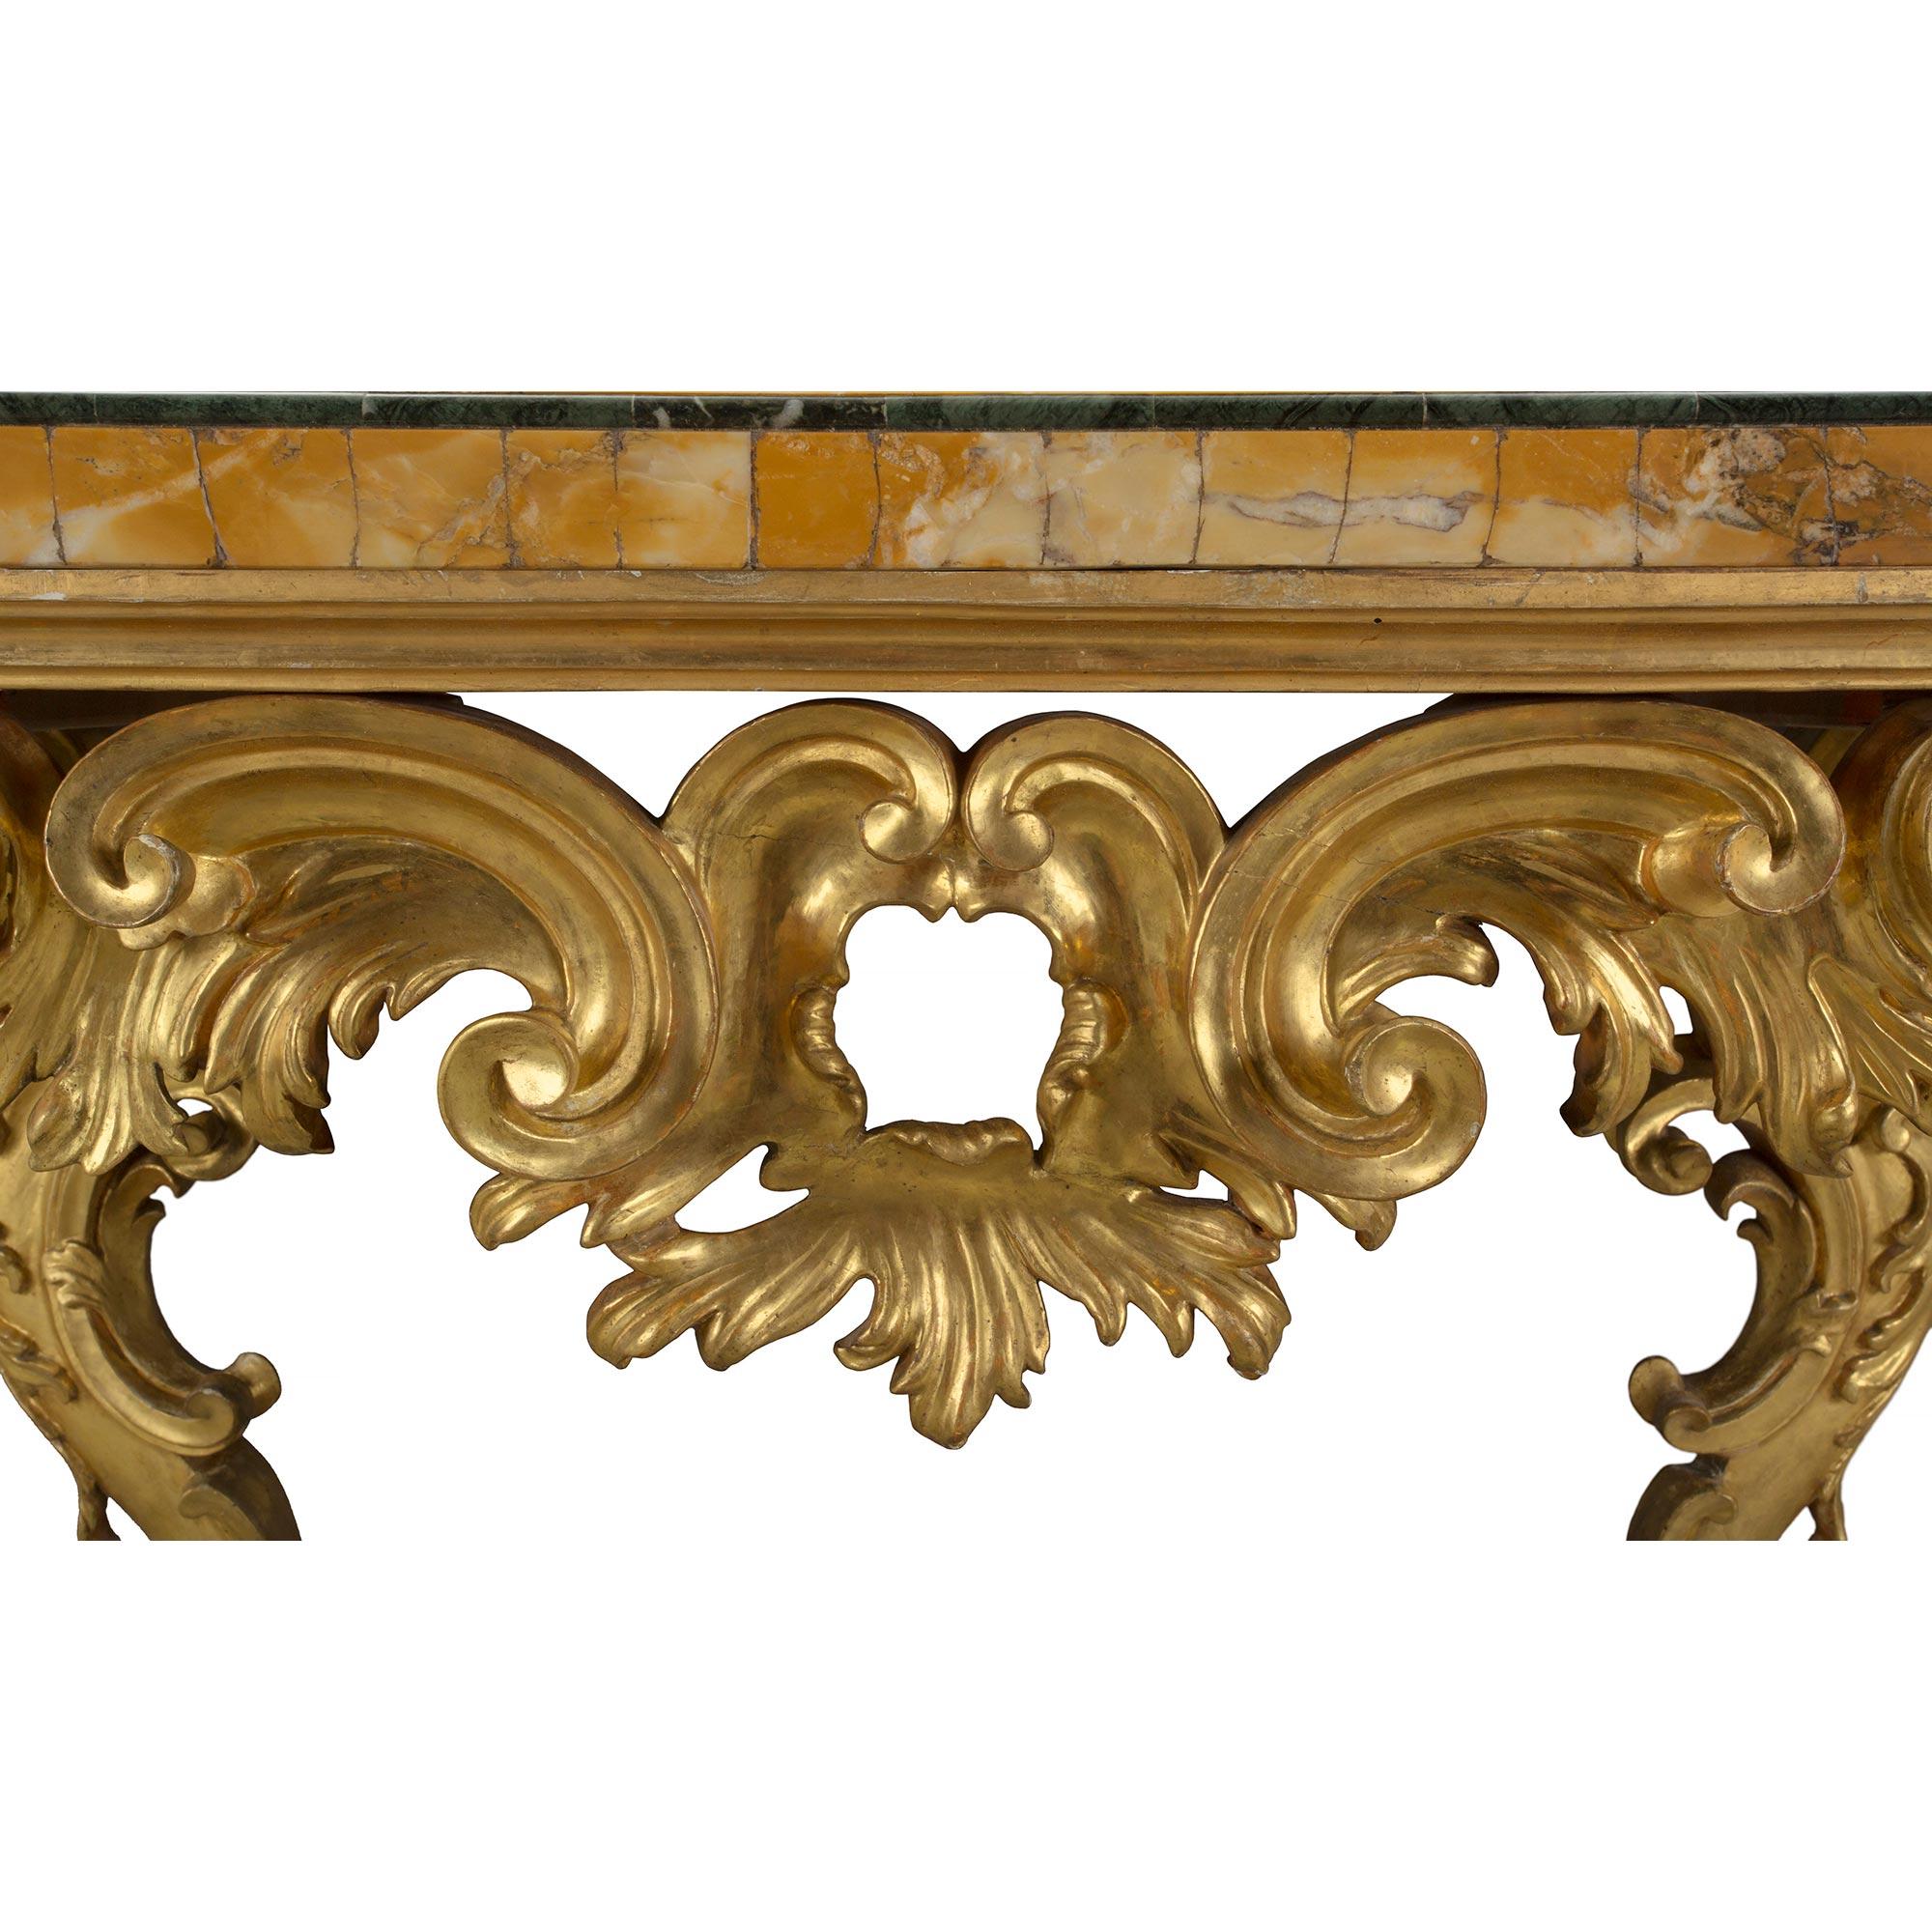 Italian 18th Century Finely Carved Giltwood and Marble Roman Console For Sale 2